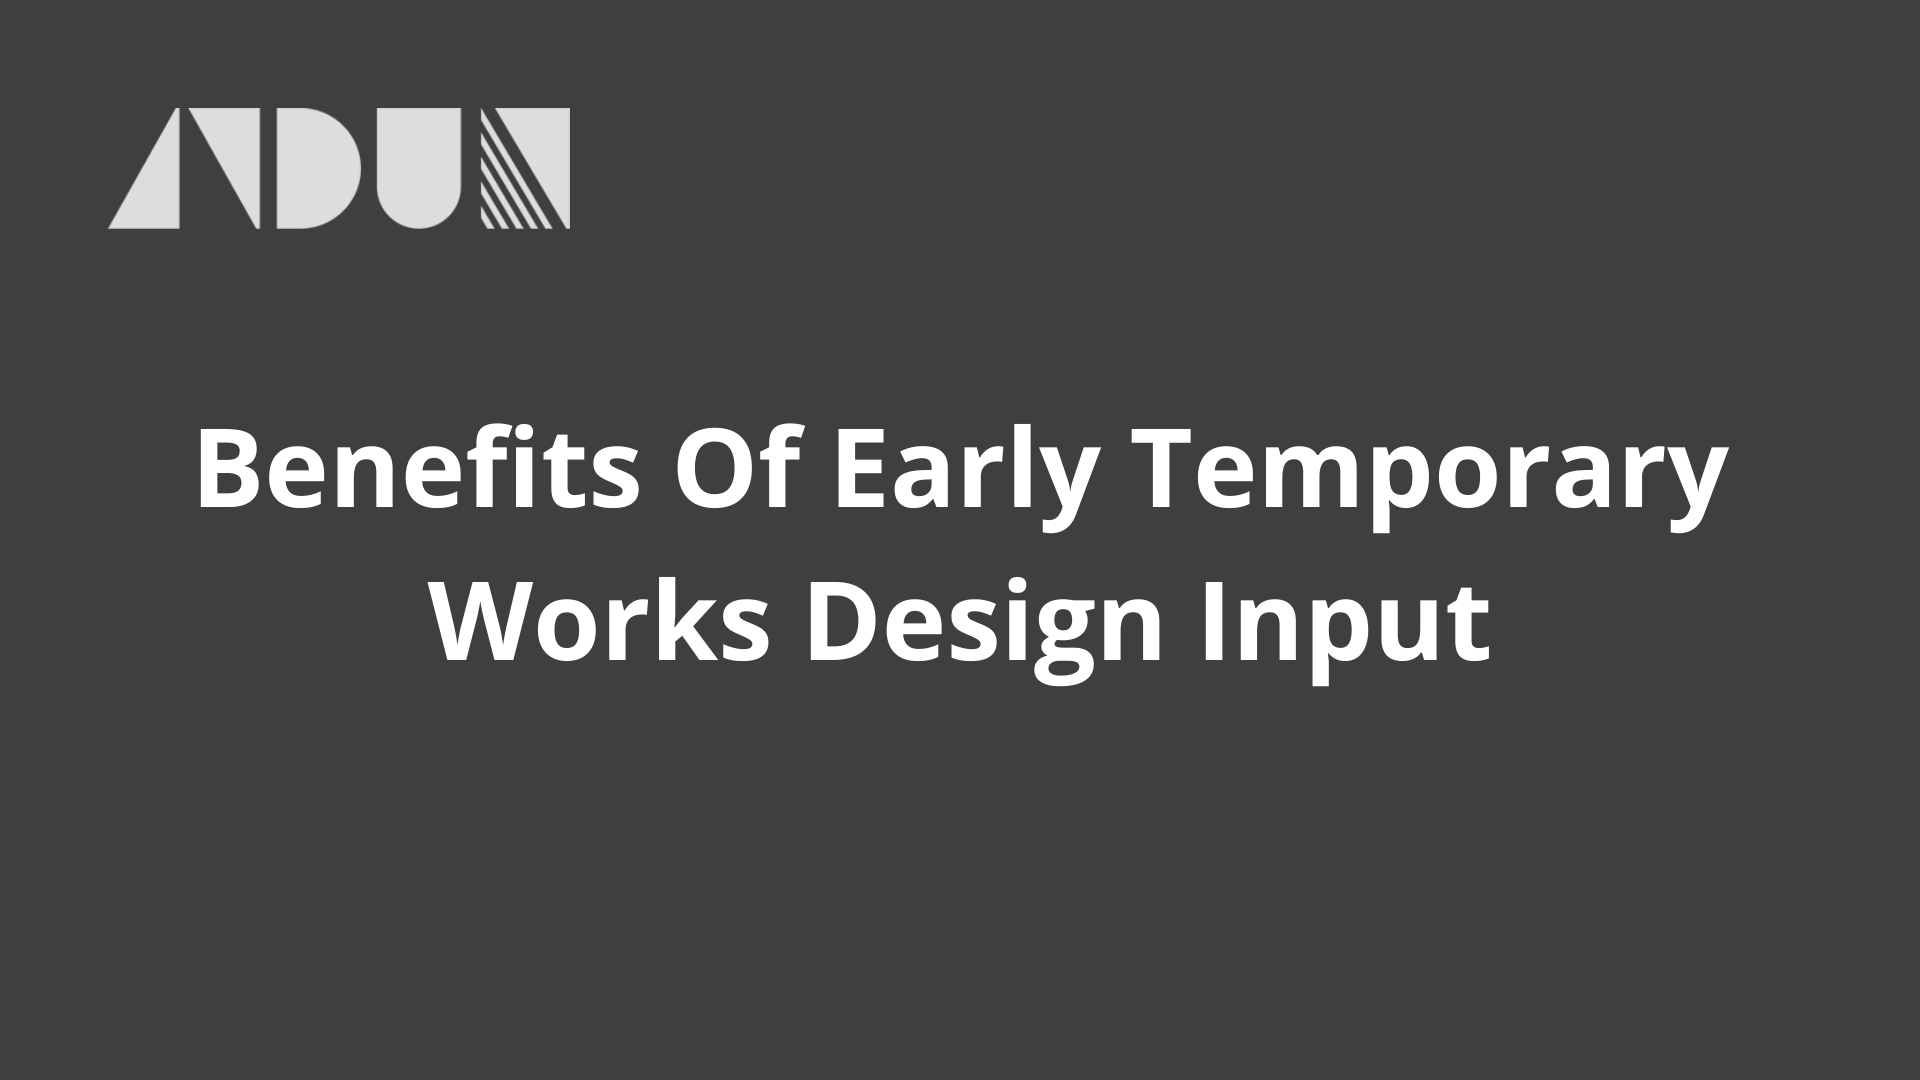 Early Temporary Works Design Input – Impacts & Benefits